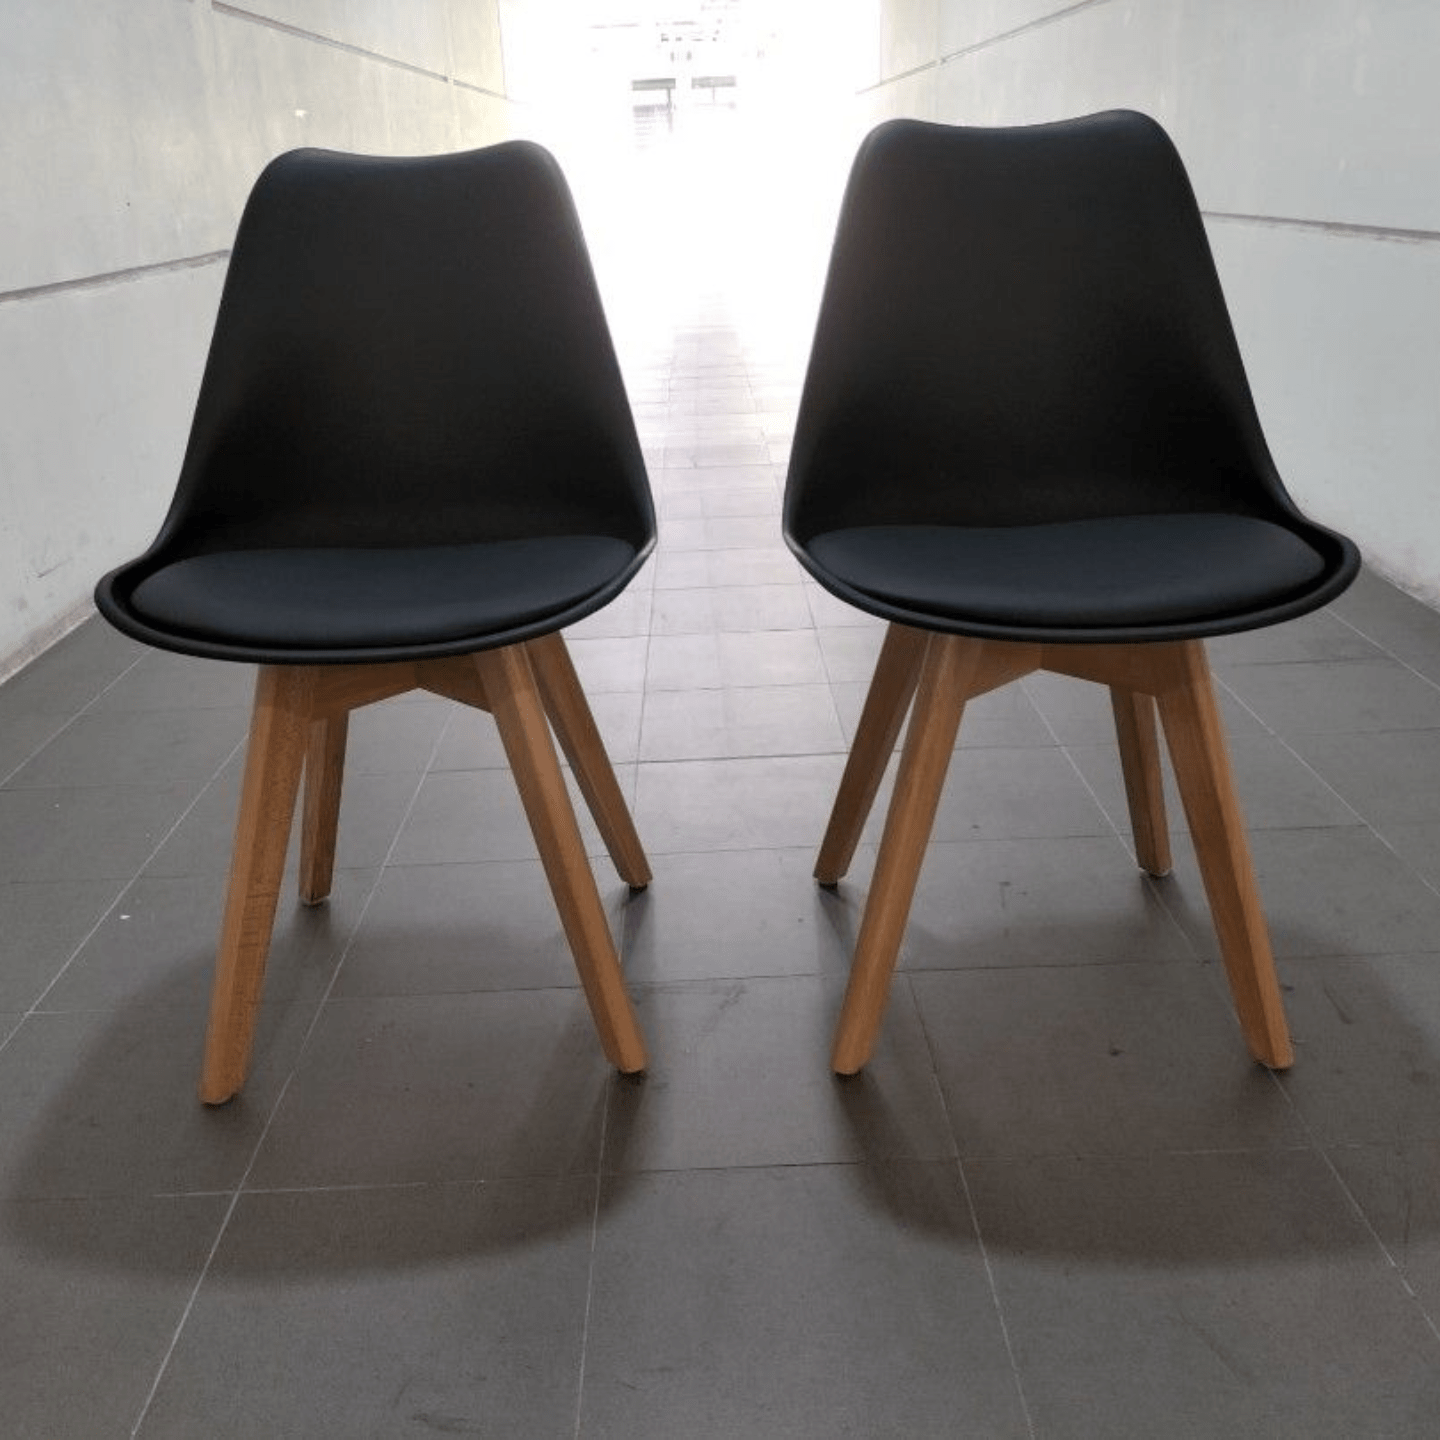 2 x VENZ Chairs in BLACK PU with Wooden Leg Frame A